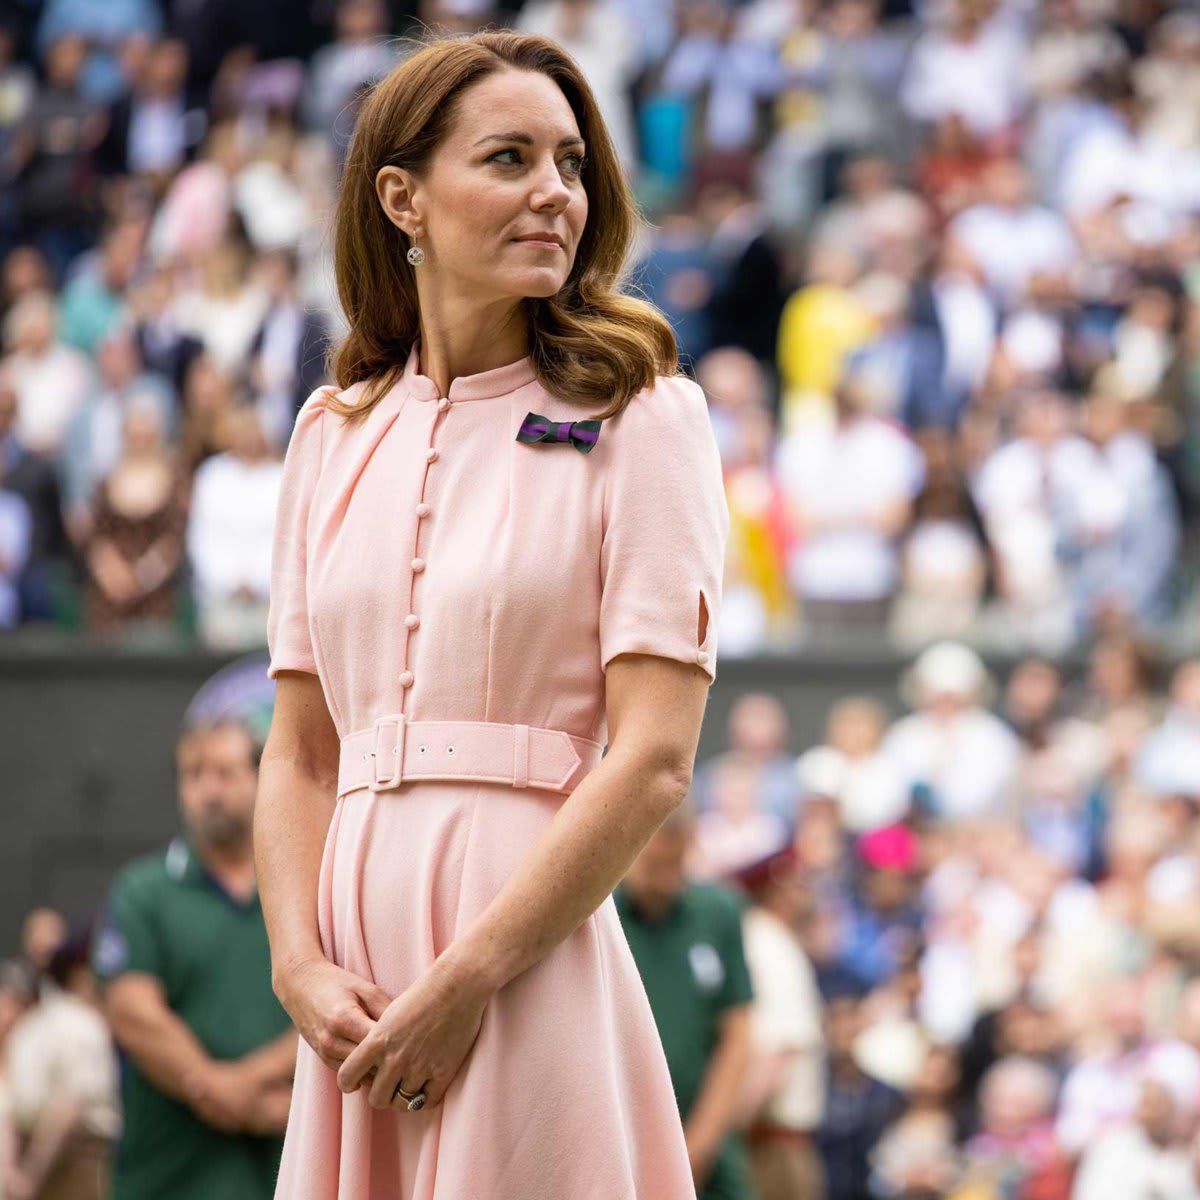 Princess Charlotte's mother looked pretty in a pink dress by Beulah London for the final day of Wimbledon this year.